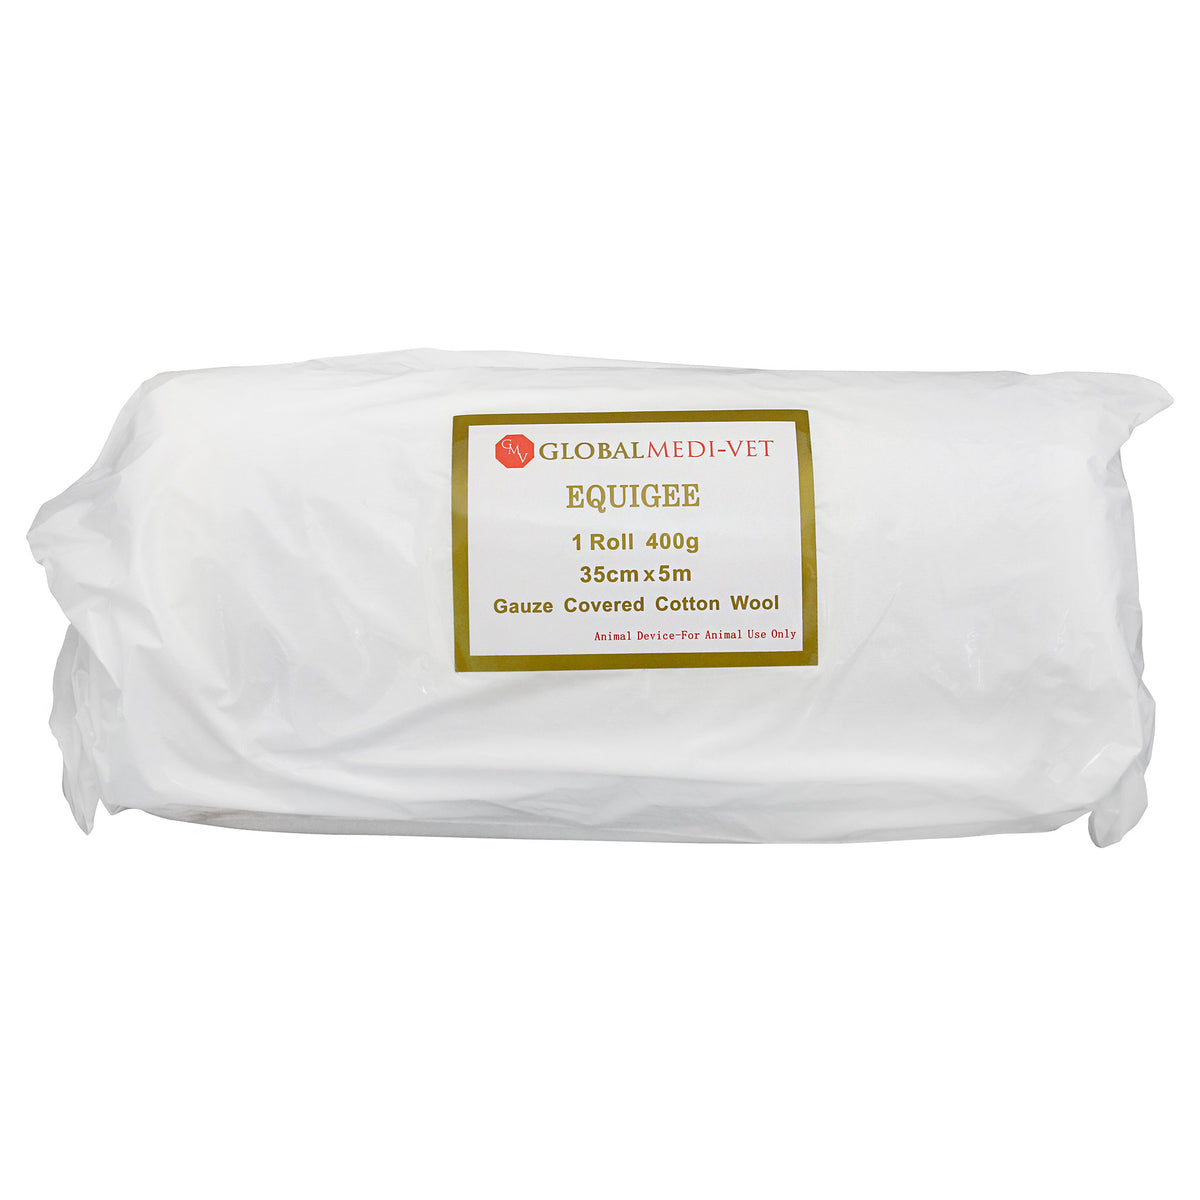 GMV Equigee Gauze Covered Cotton Wool Roll